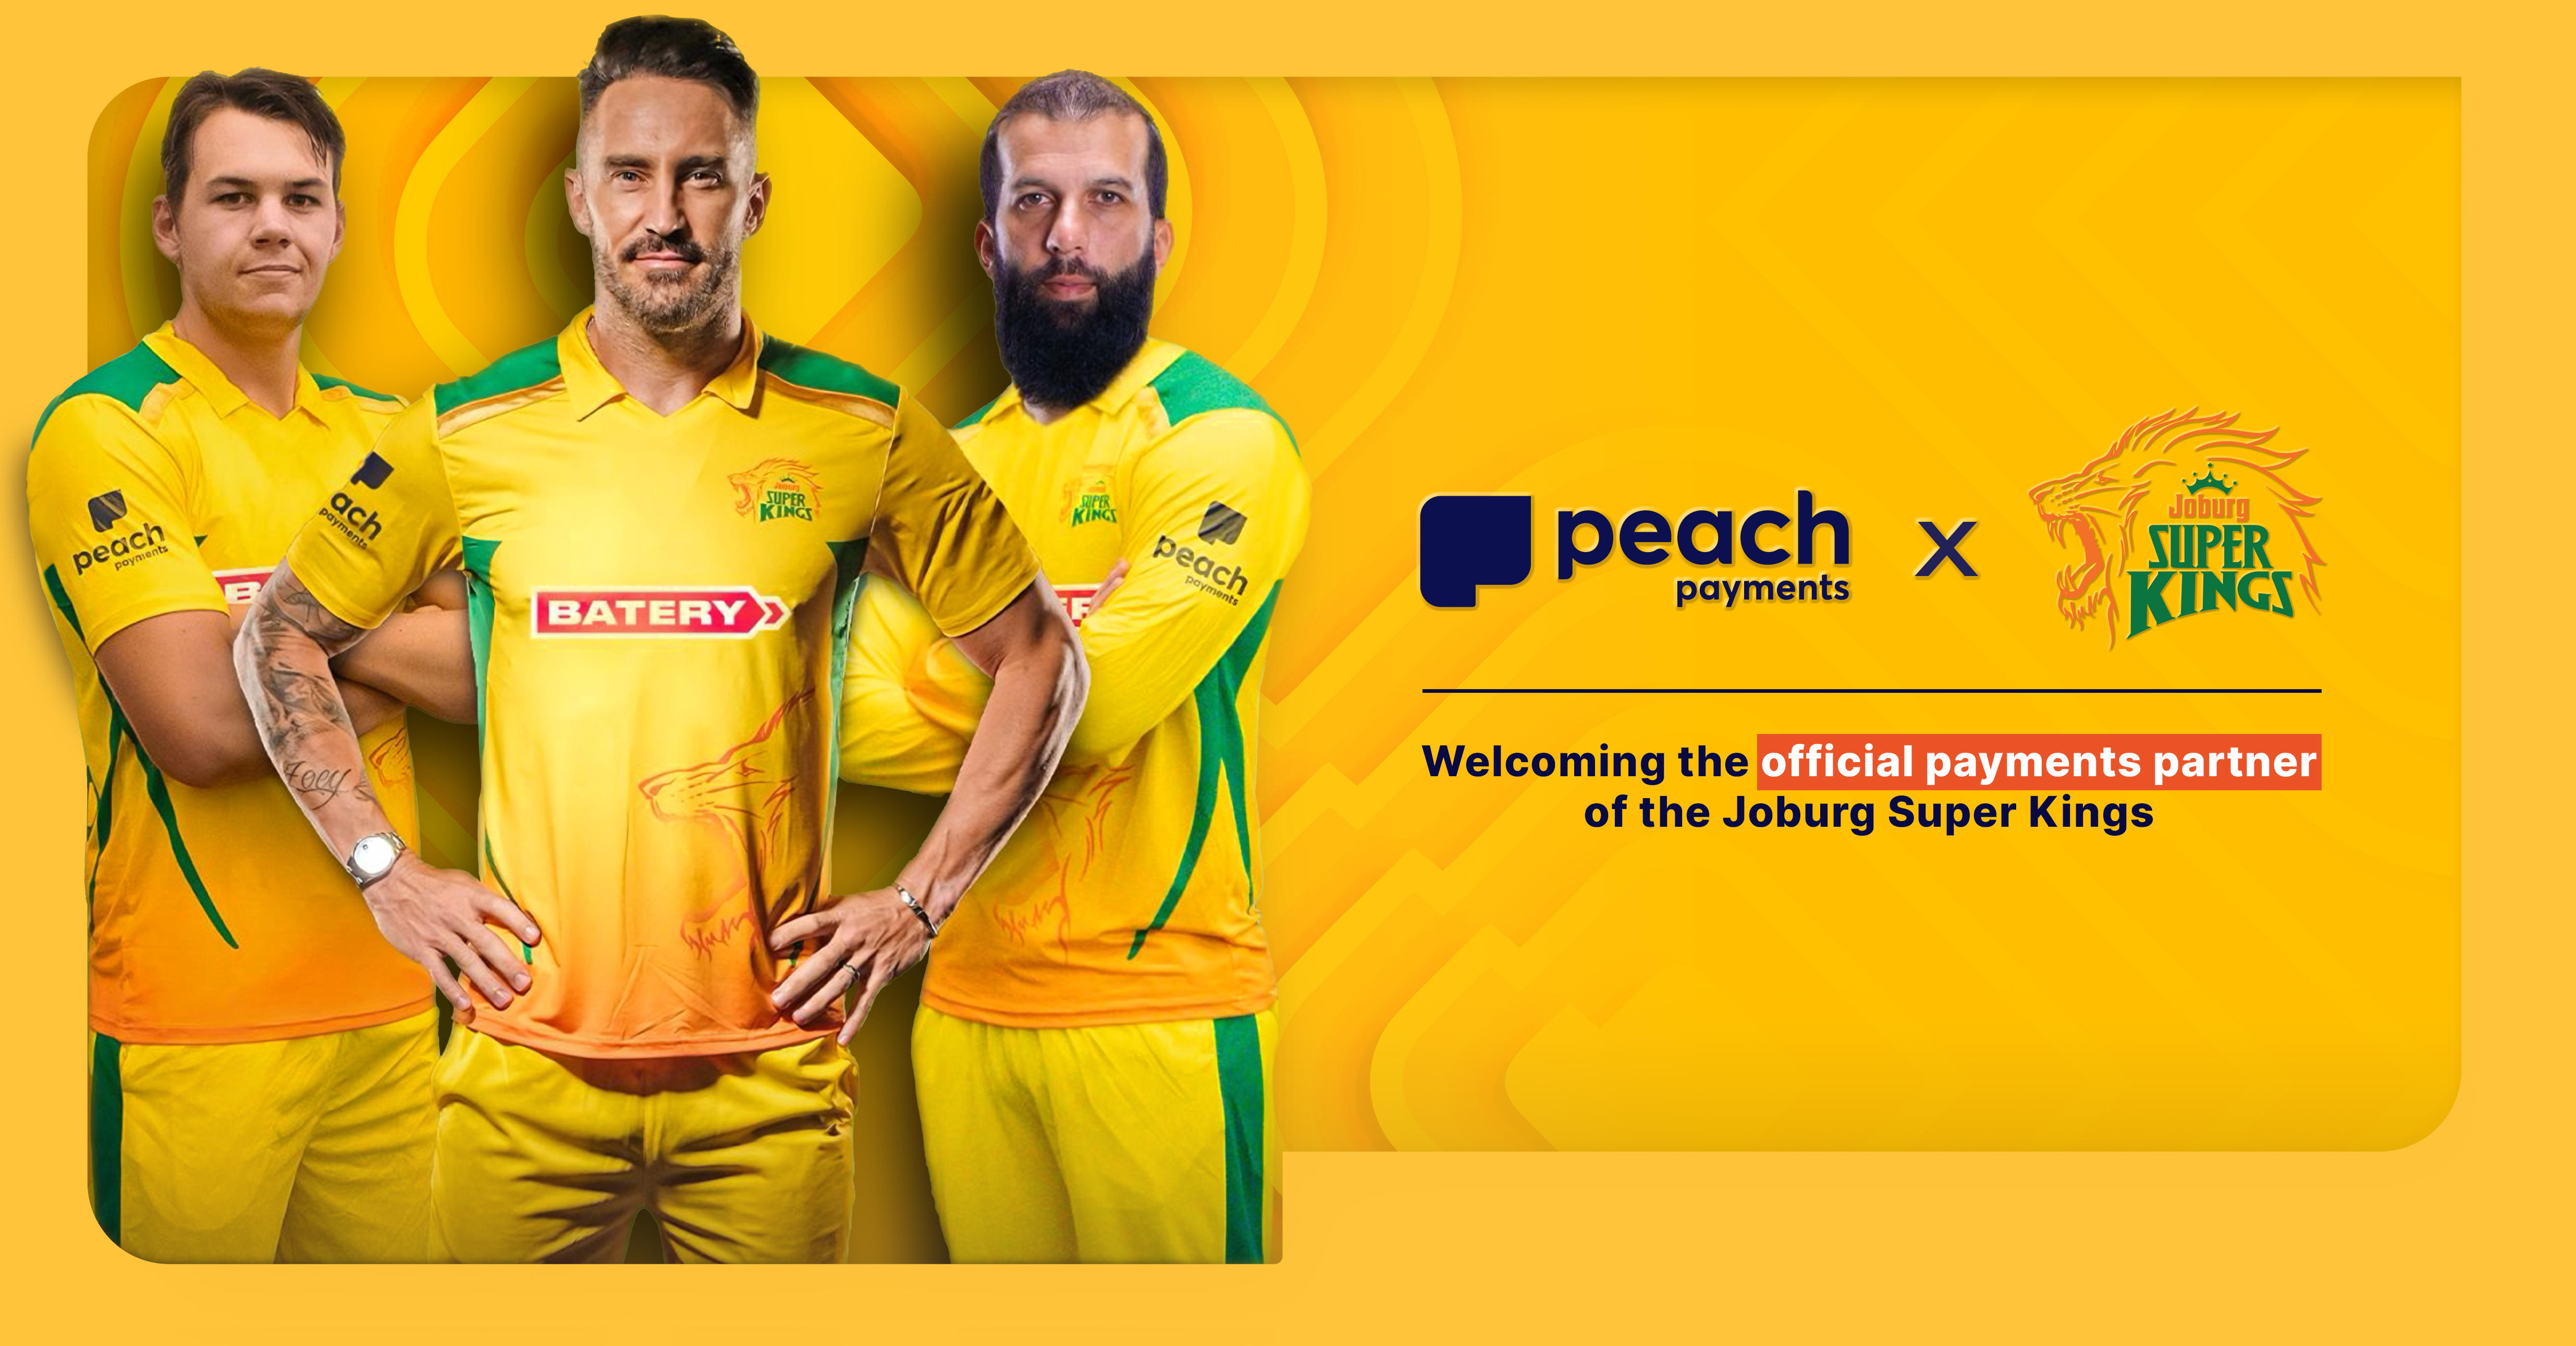 Peach Payments bowled over by the Joburg Super Kings